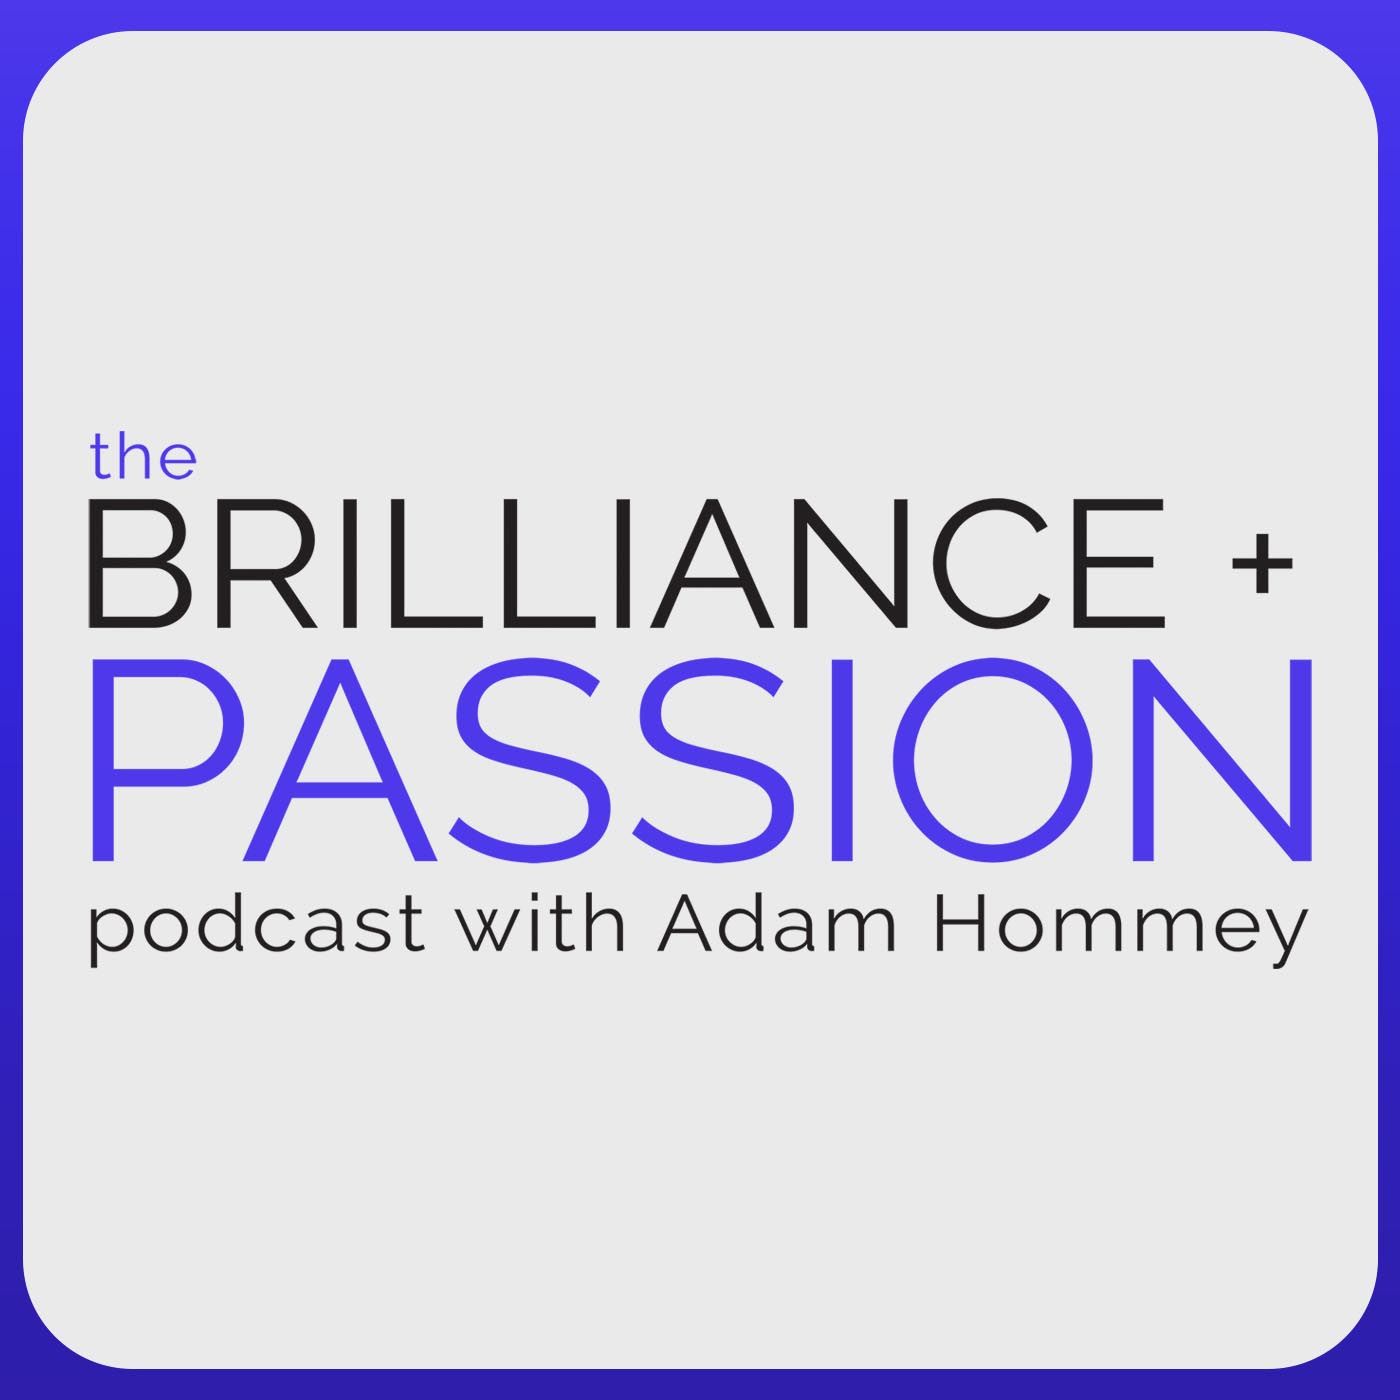 The BRILLIANCE + PASSION Podcast with Adam Hommey